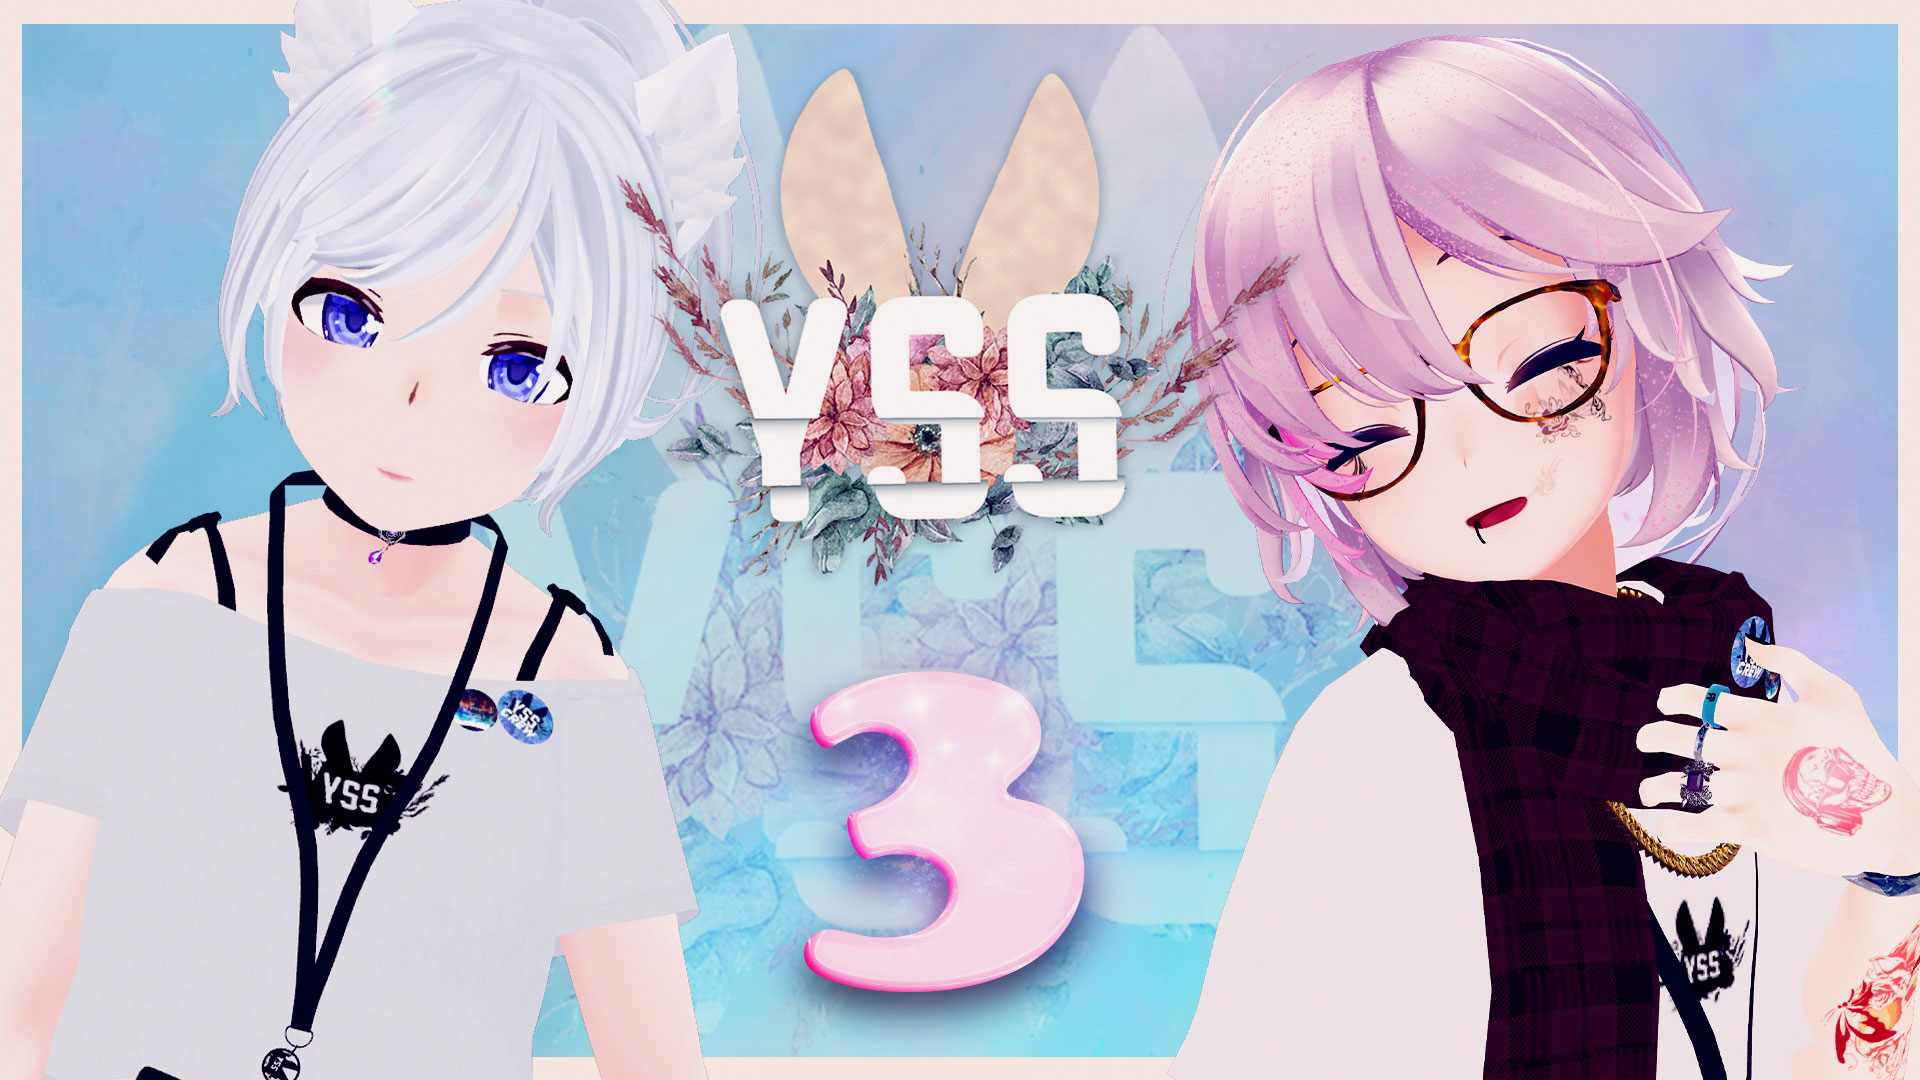 #YSS_HomeLive「YSS3周年記念らいぶ vol.2」